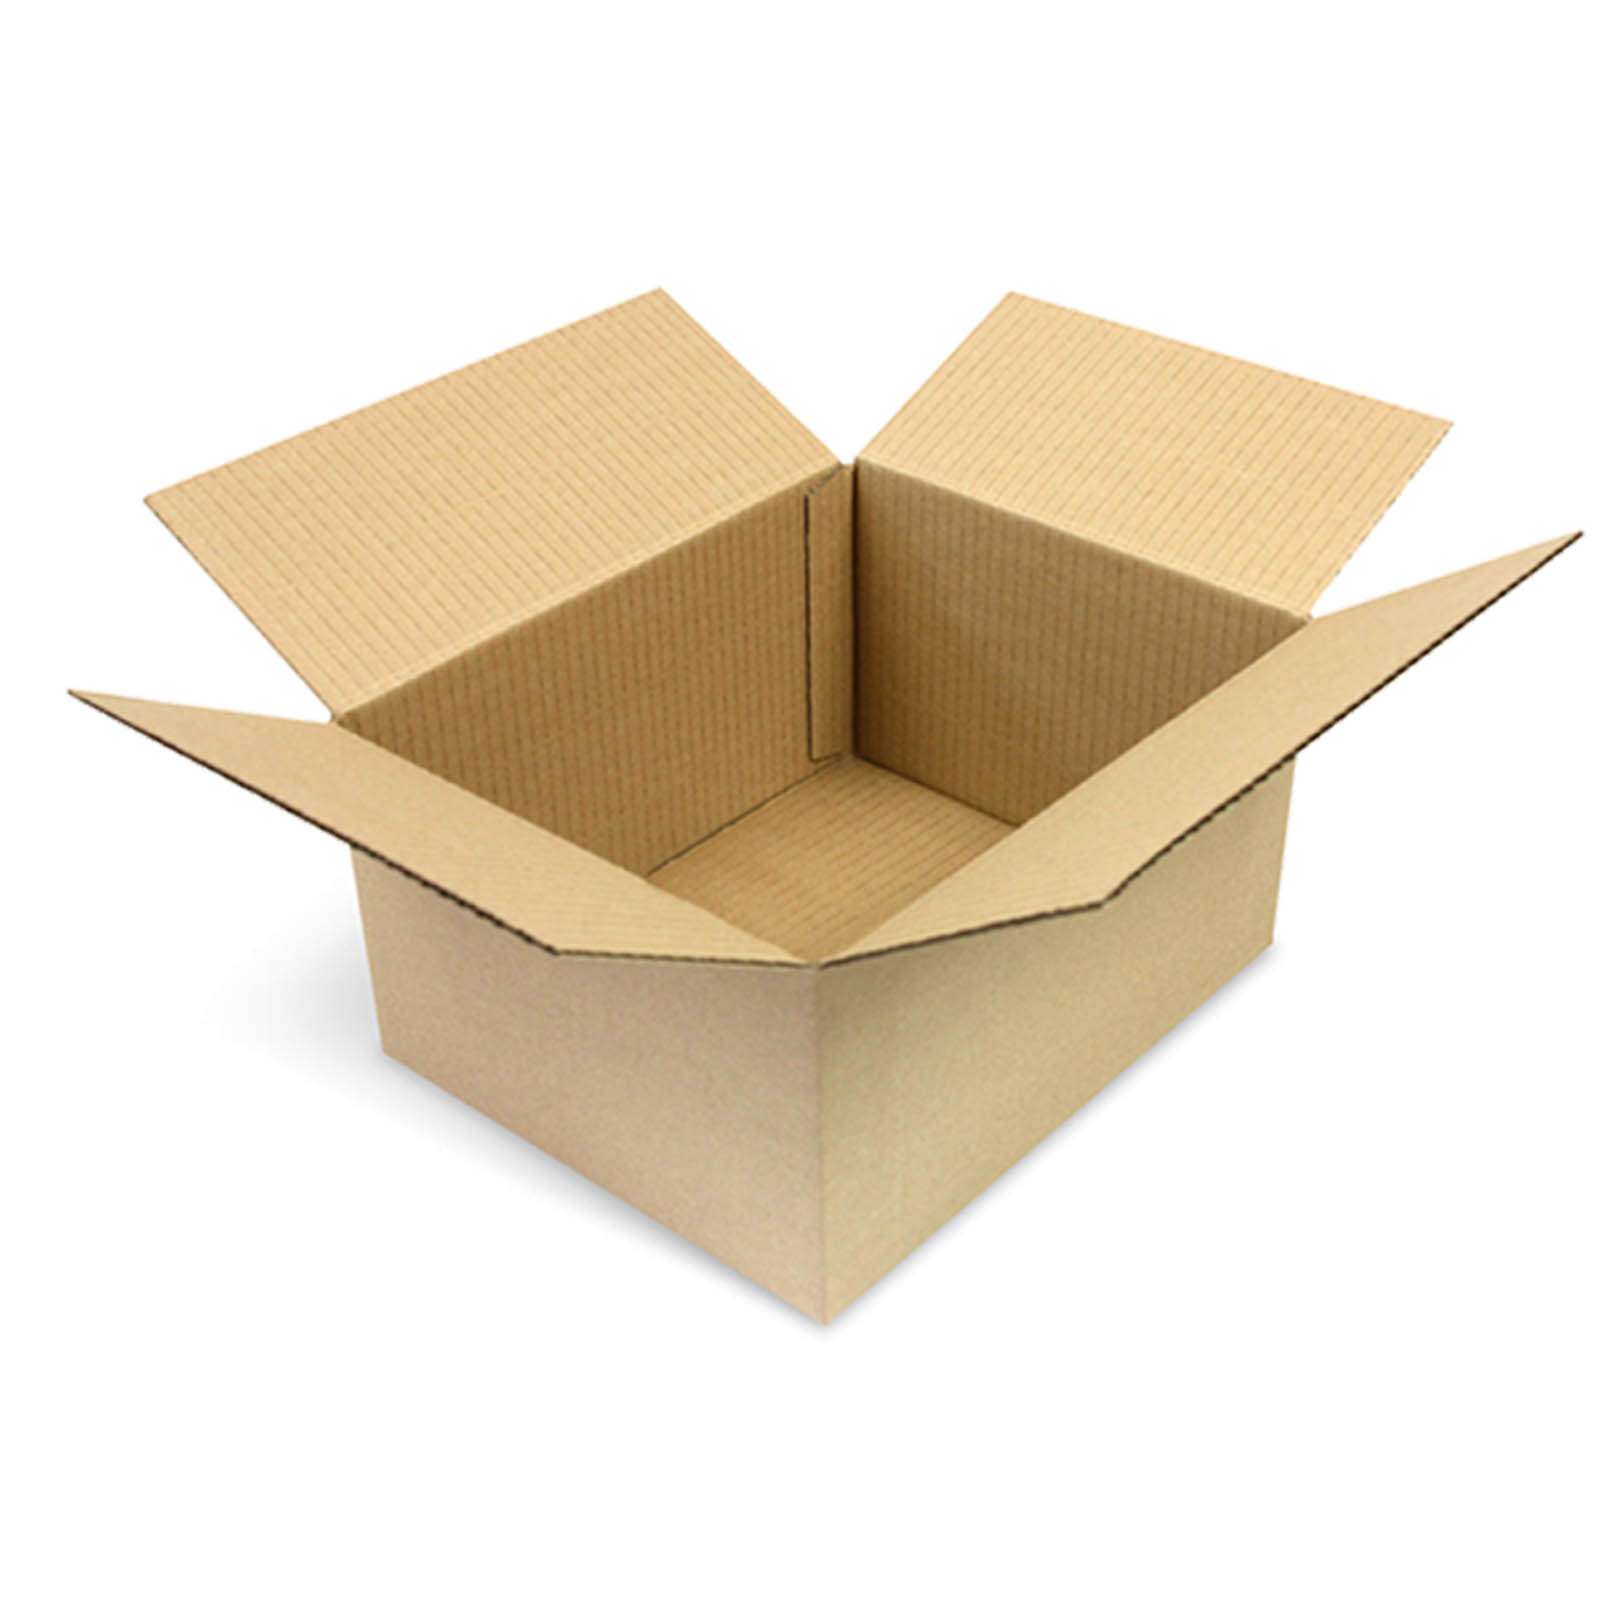 Cardboard box 250x200x140 mm - with digital print 2-sided (neighbouring sides)